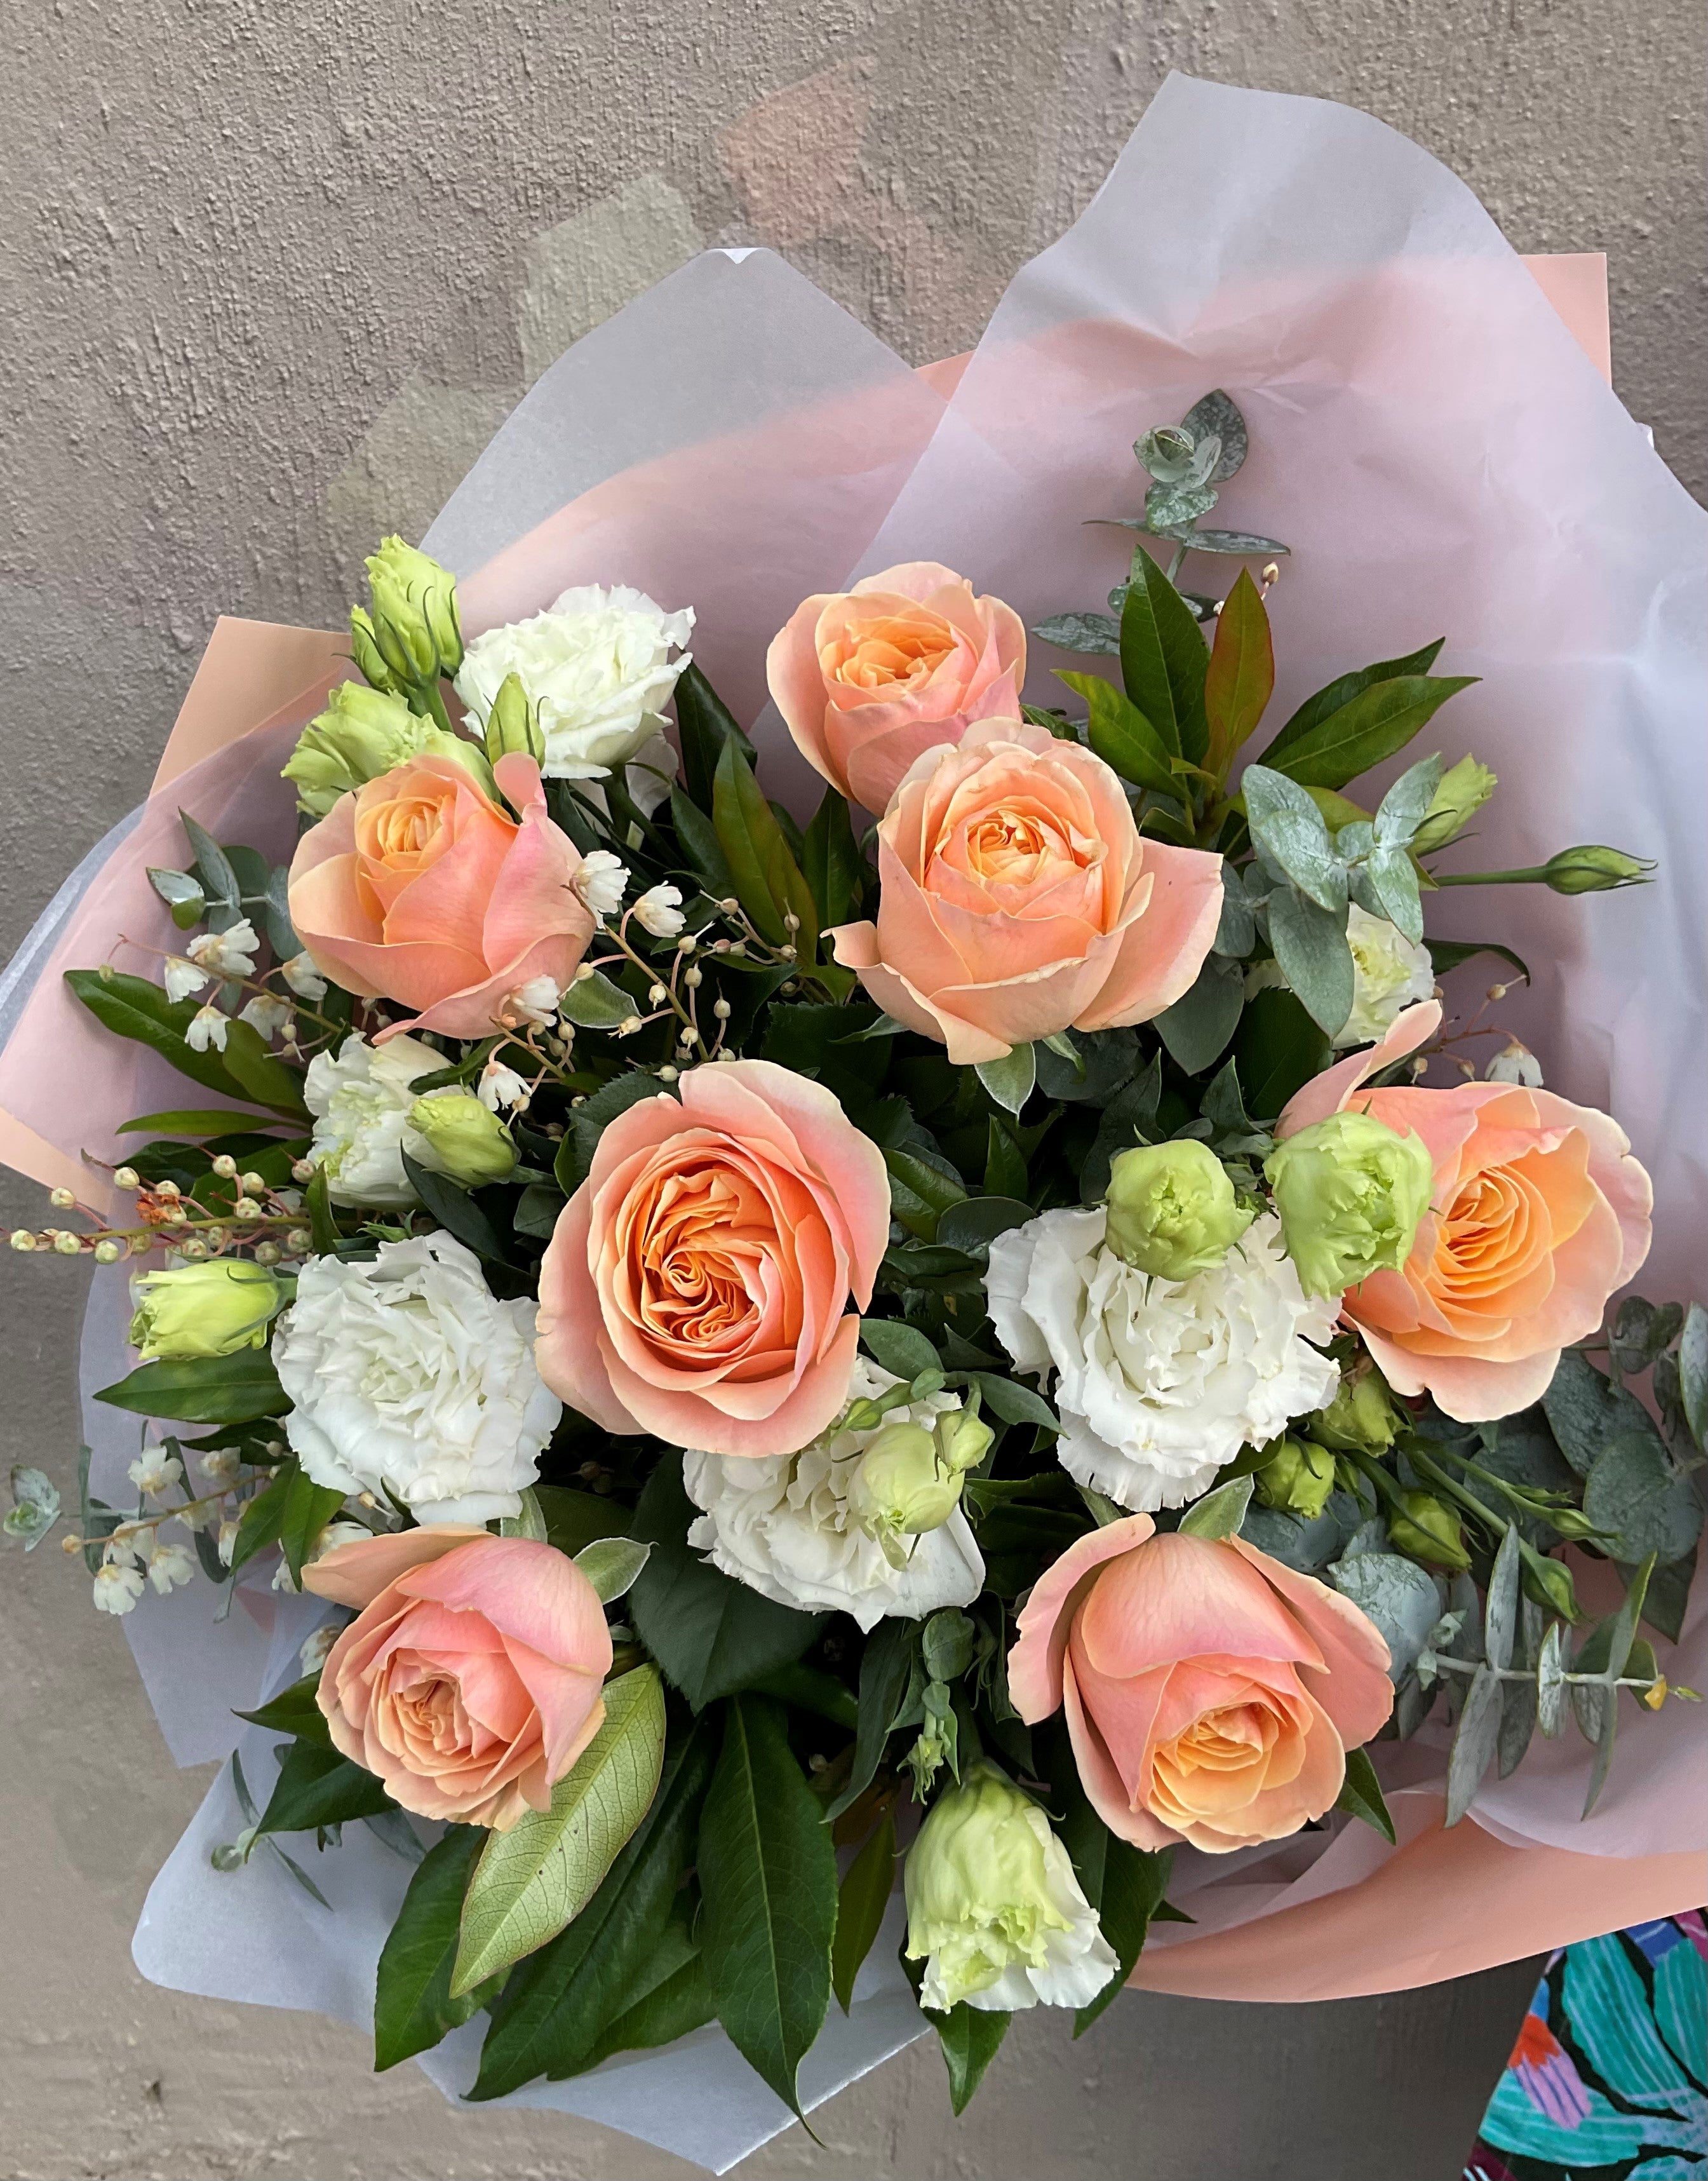 Mixed Pastel Bouquet with Roses